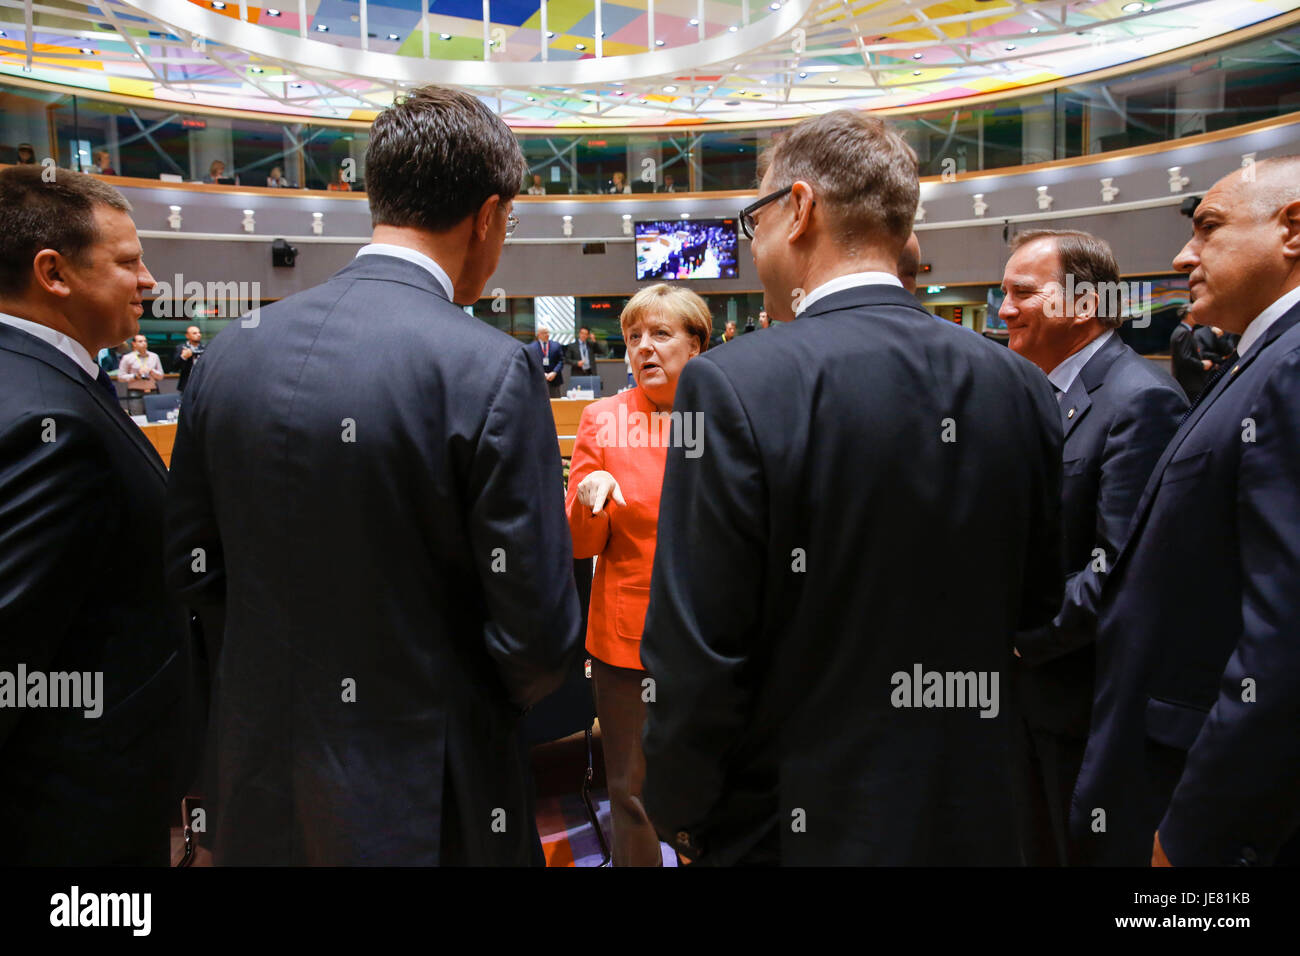 Brussels, Belgium. 23rd June, 2017. German Chancellor Angela Merkel (C) talks with other leaders at second day's EU Summit in Brussels, Belgium, June 23, 2017. Credit: Ye Pingfan/Xinhua/Alamy Live News Stock Photo